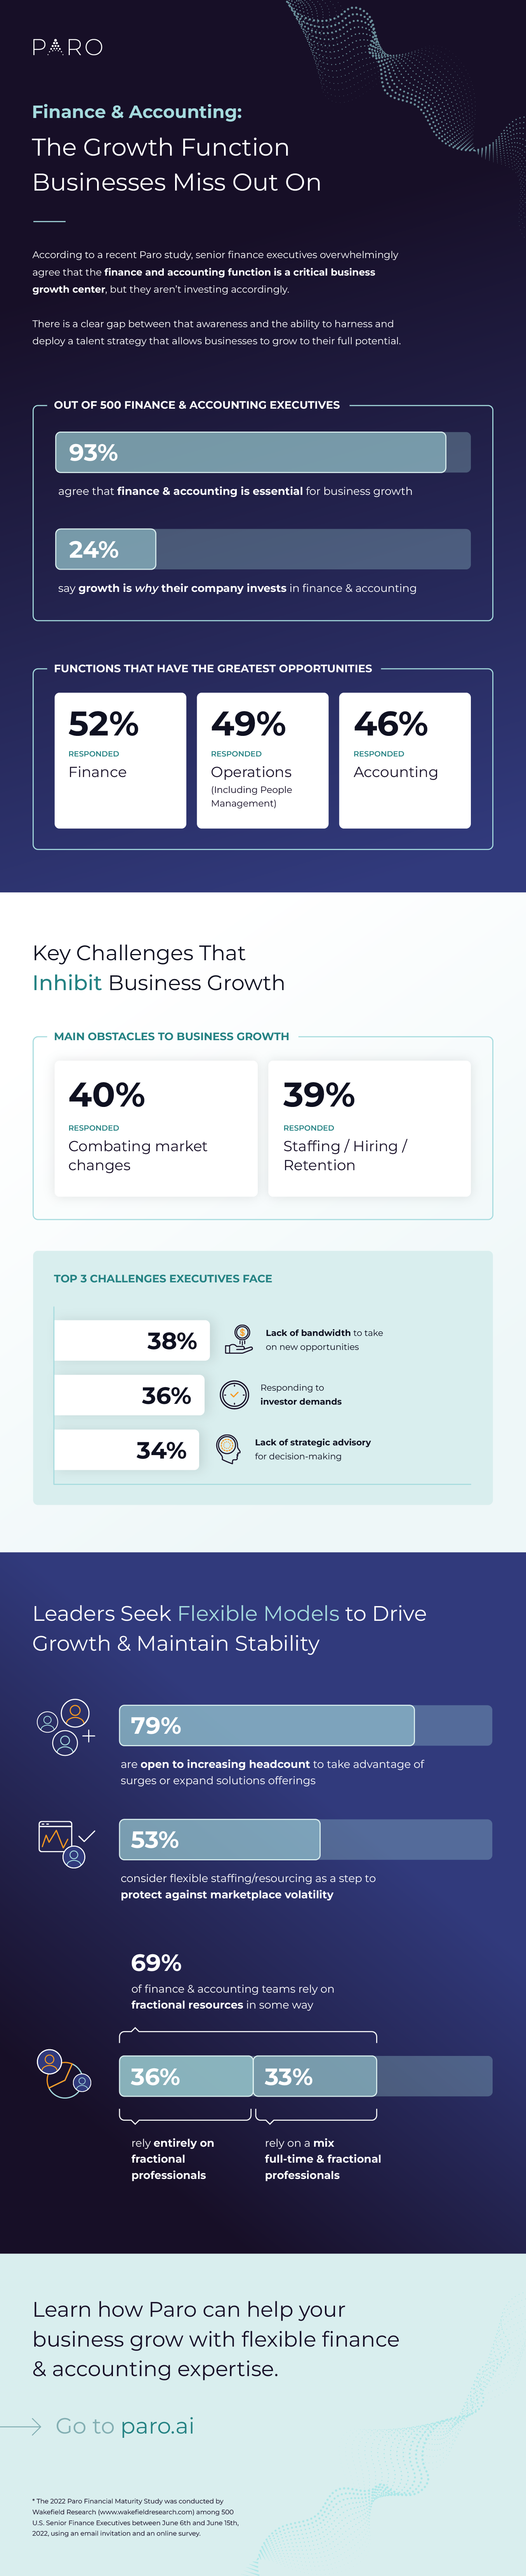 Finance & Accounting: The Growth Function Businesses Miss Out On Infographic